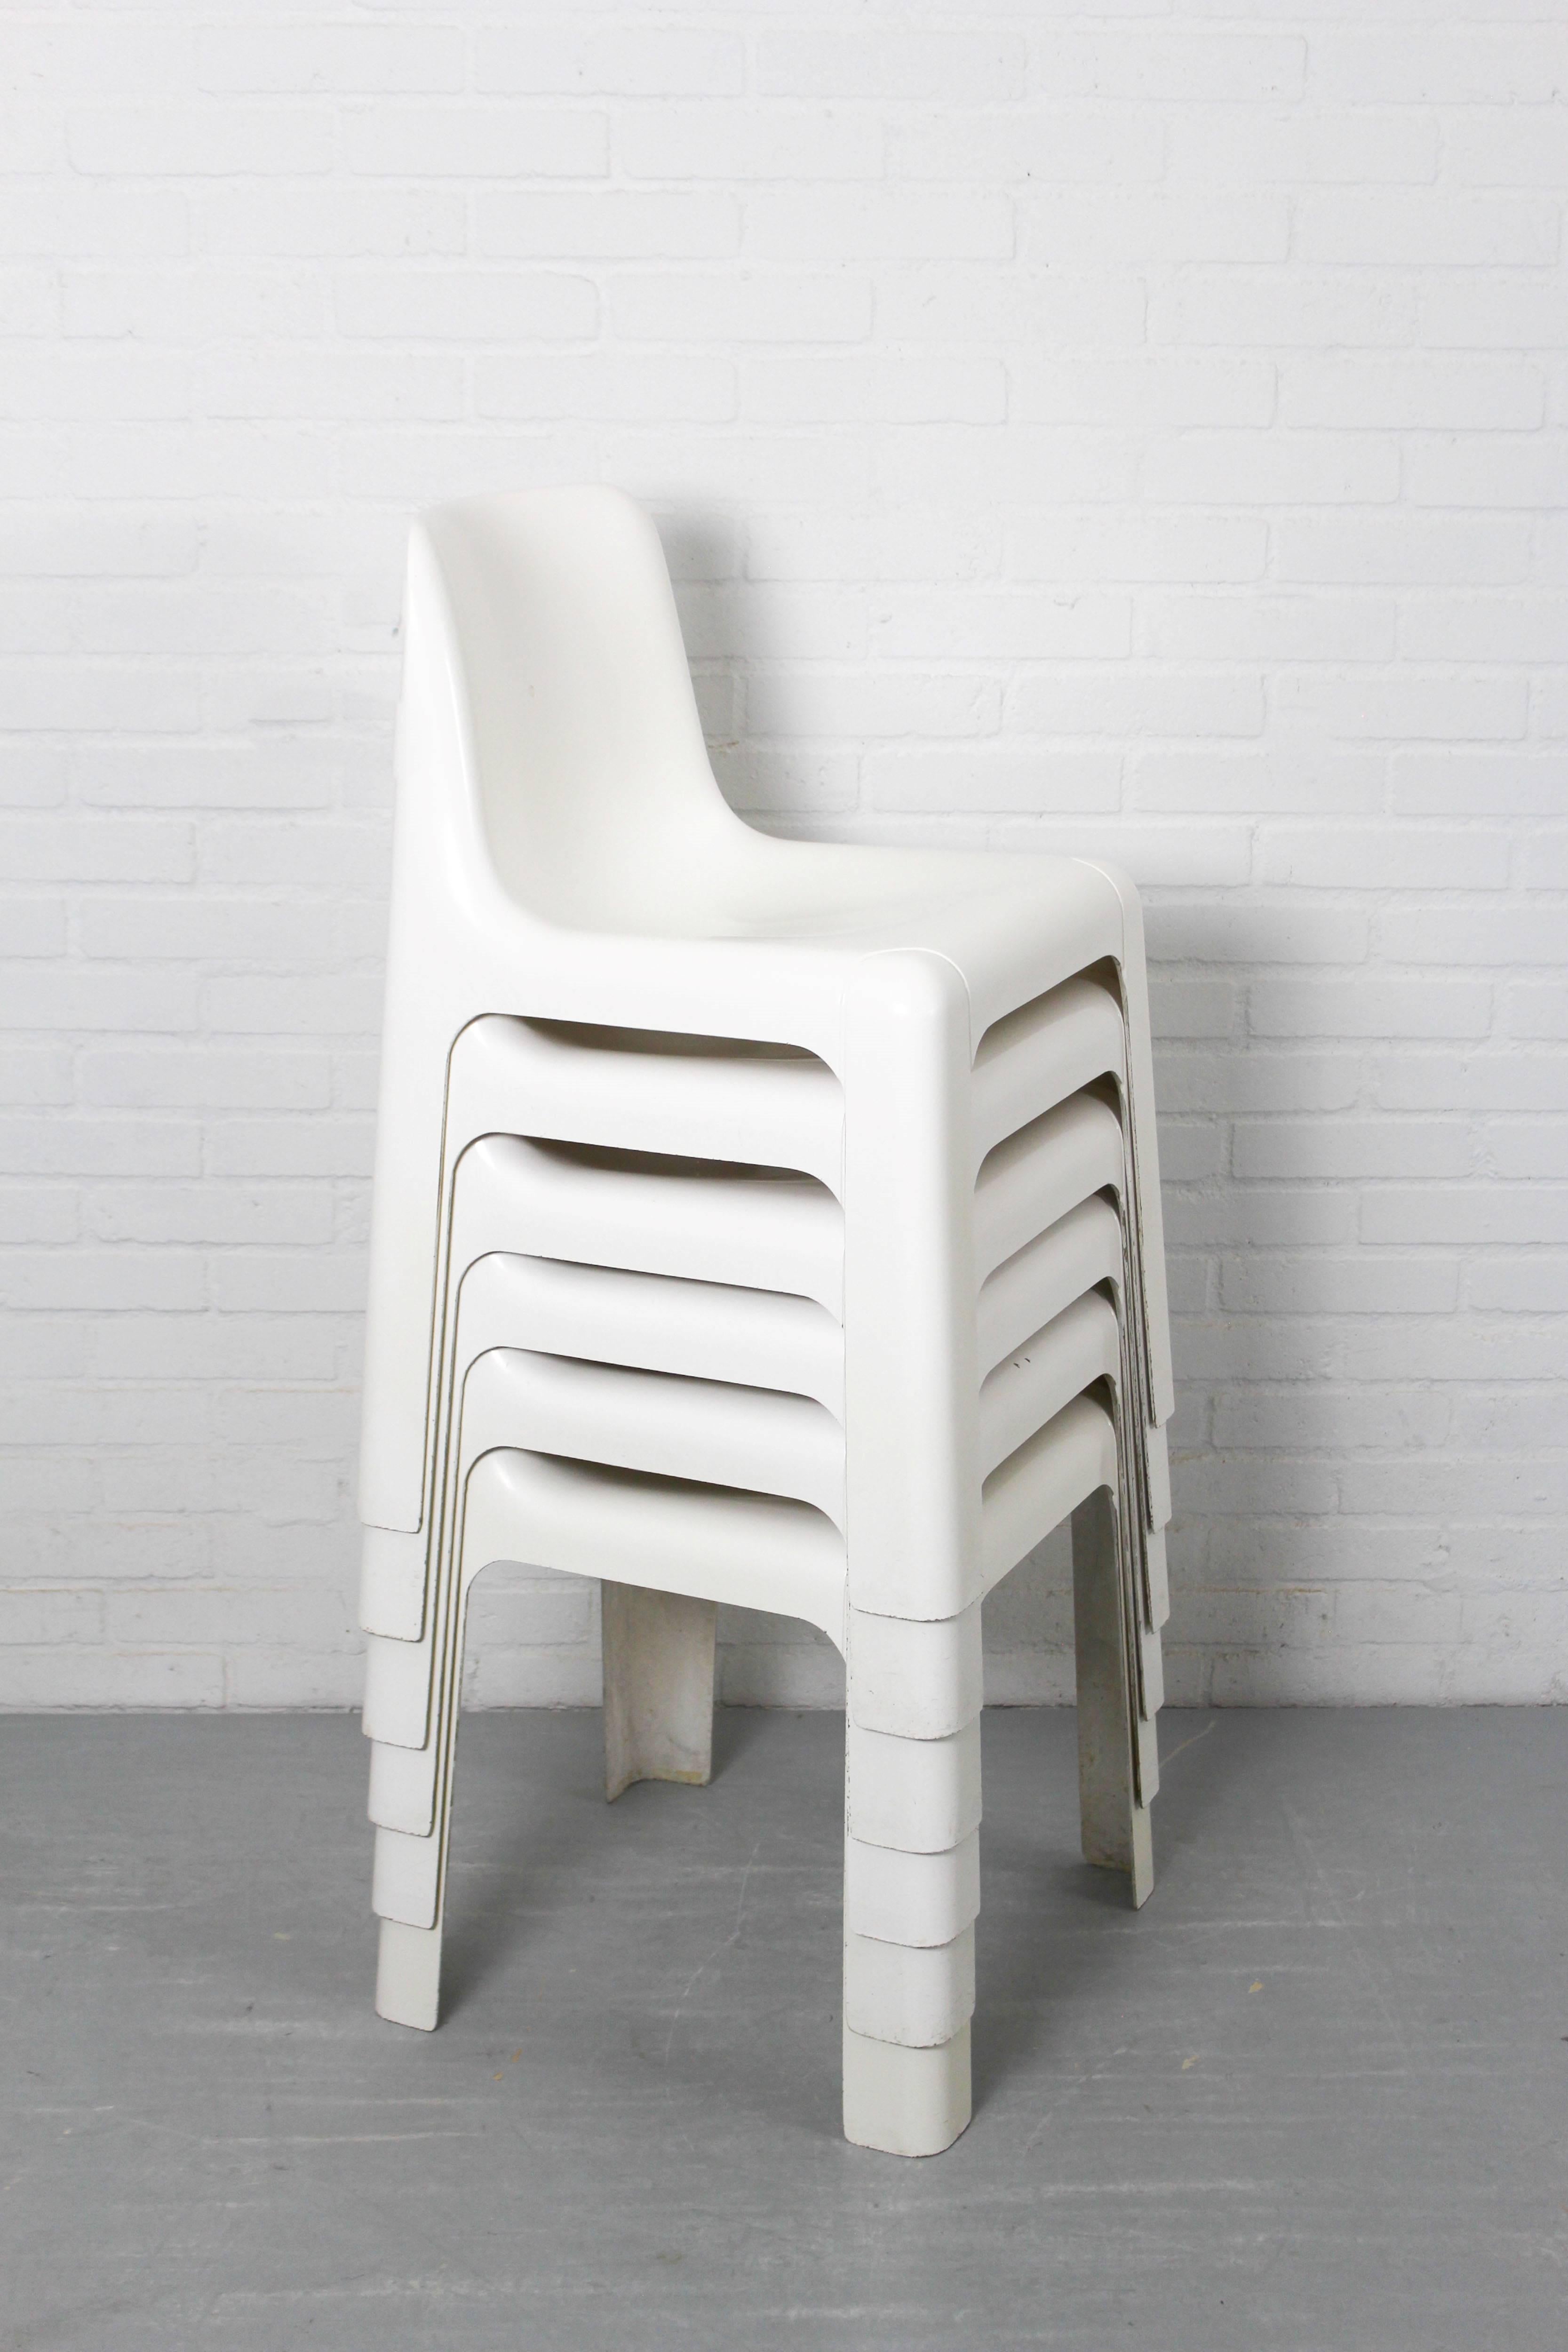 6 OZOO 700 Fiberglass Dining Chairs by Marc Berthier for Roche Bobois, 1970s For Sale 11